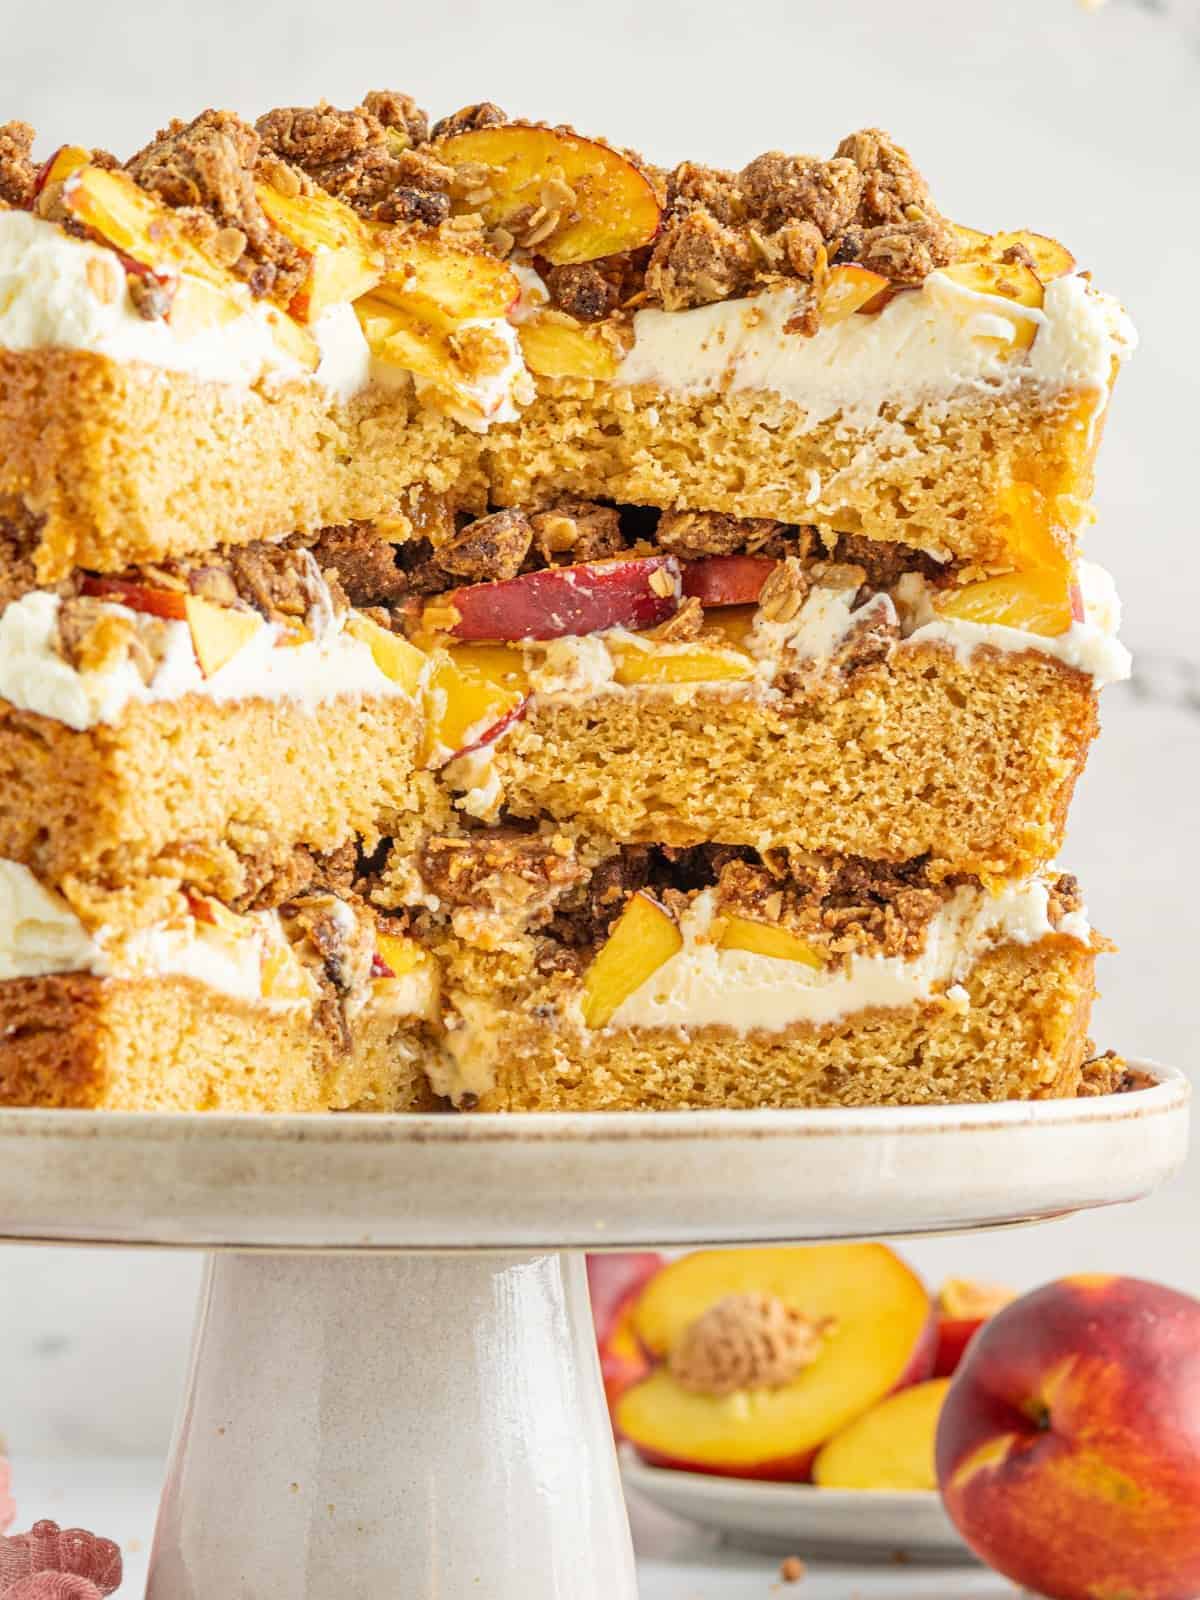 peach cobbler cake on a cake stand, with pieces cut away to show the center